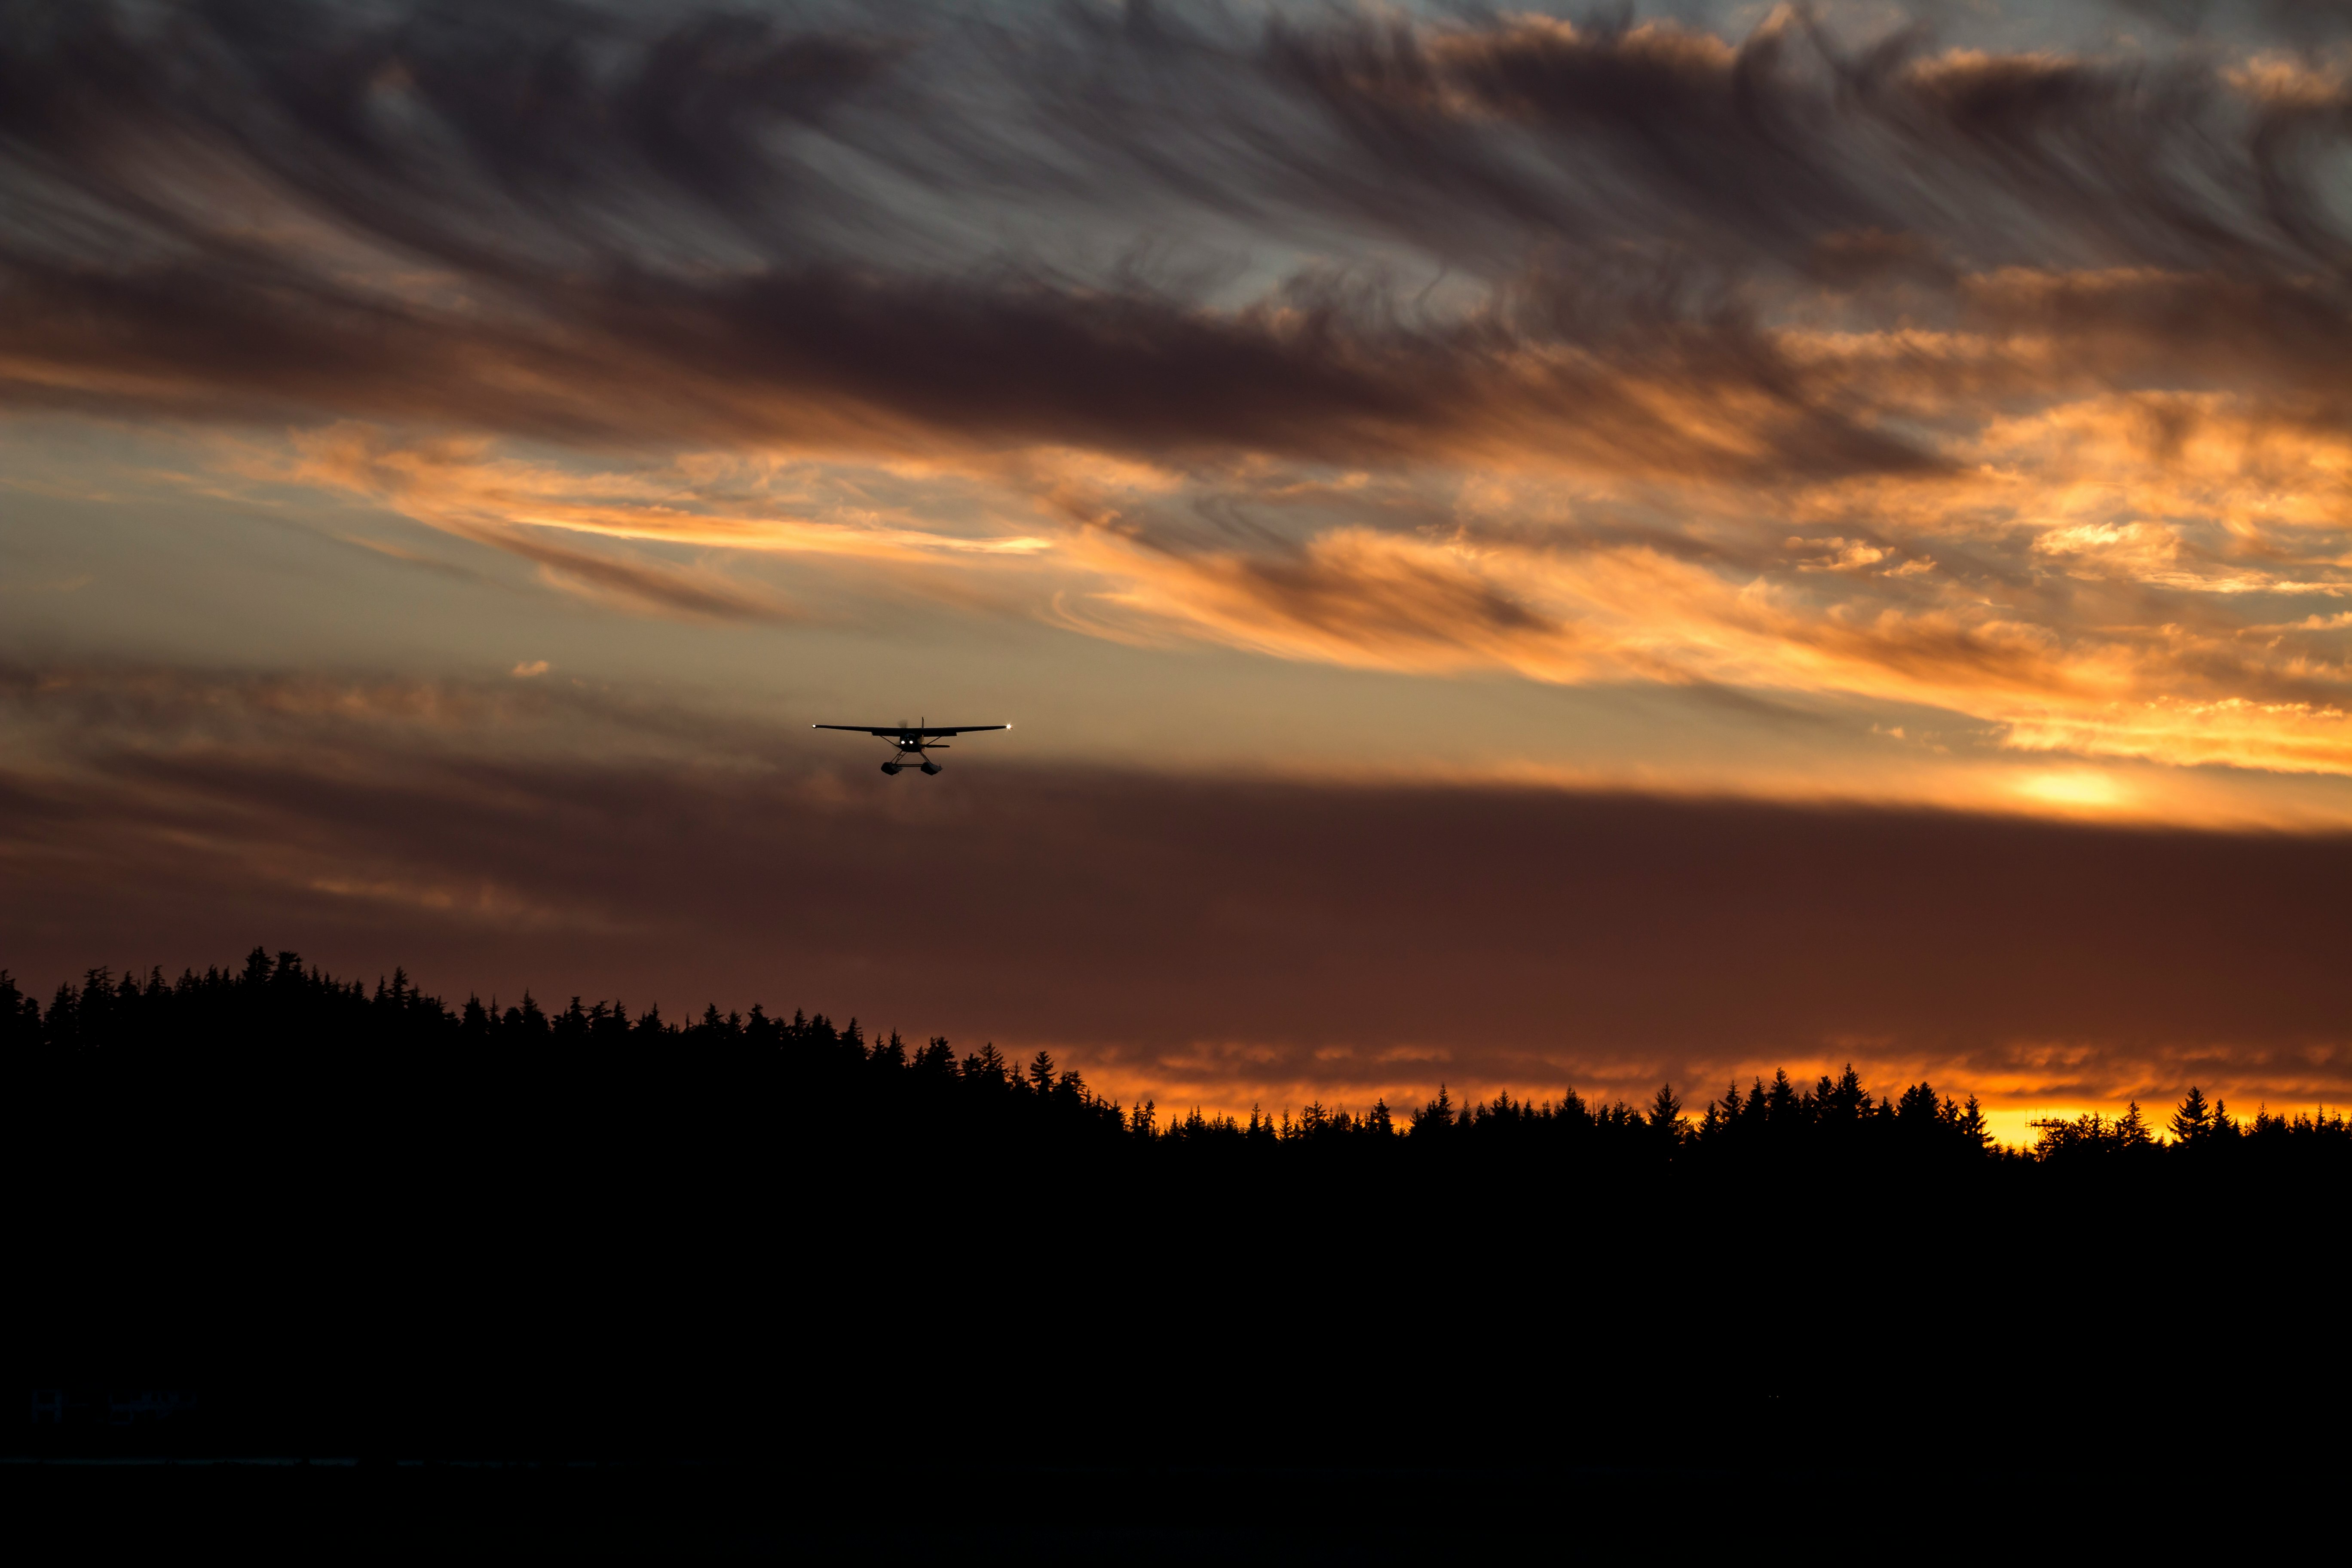 biplane on air above silhouette of trees during golden hour